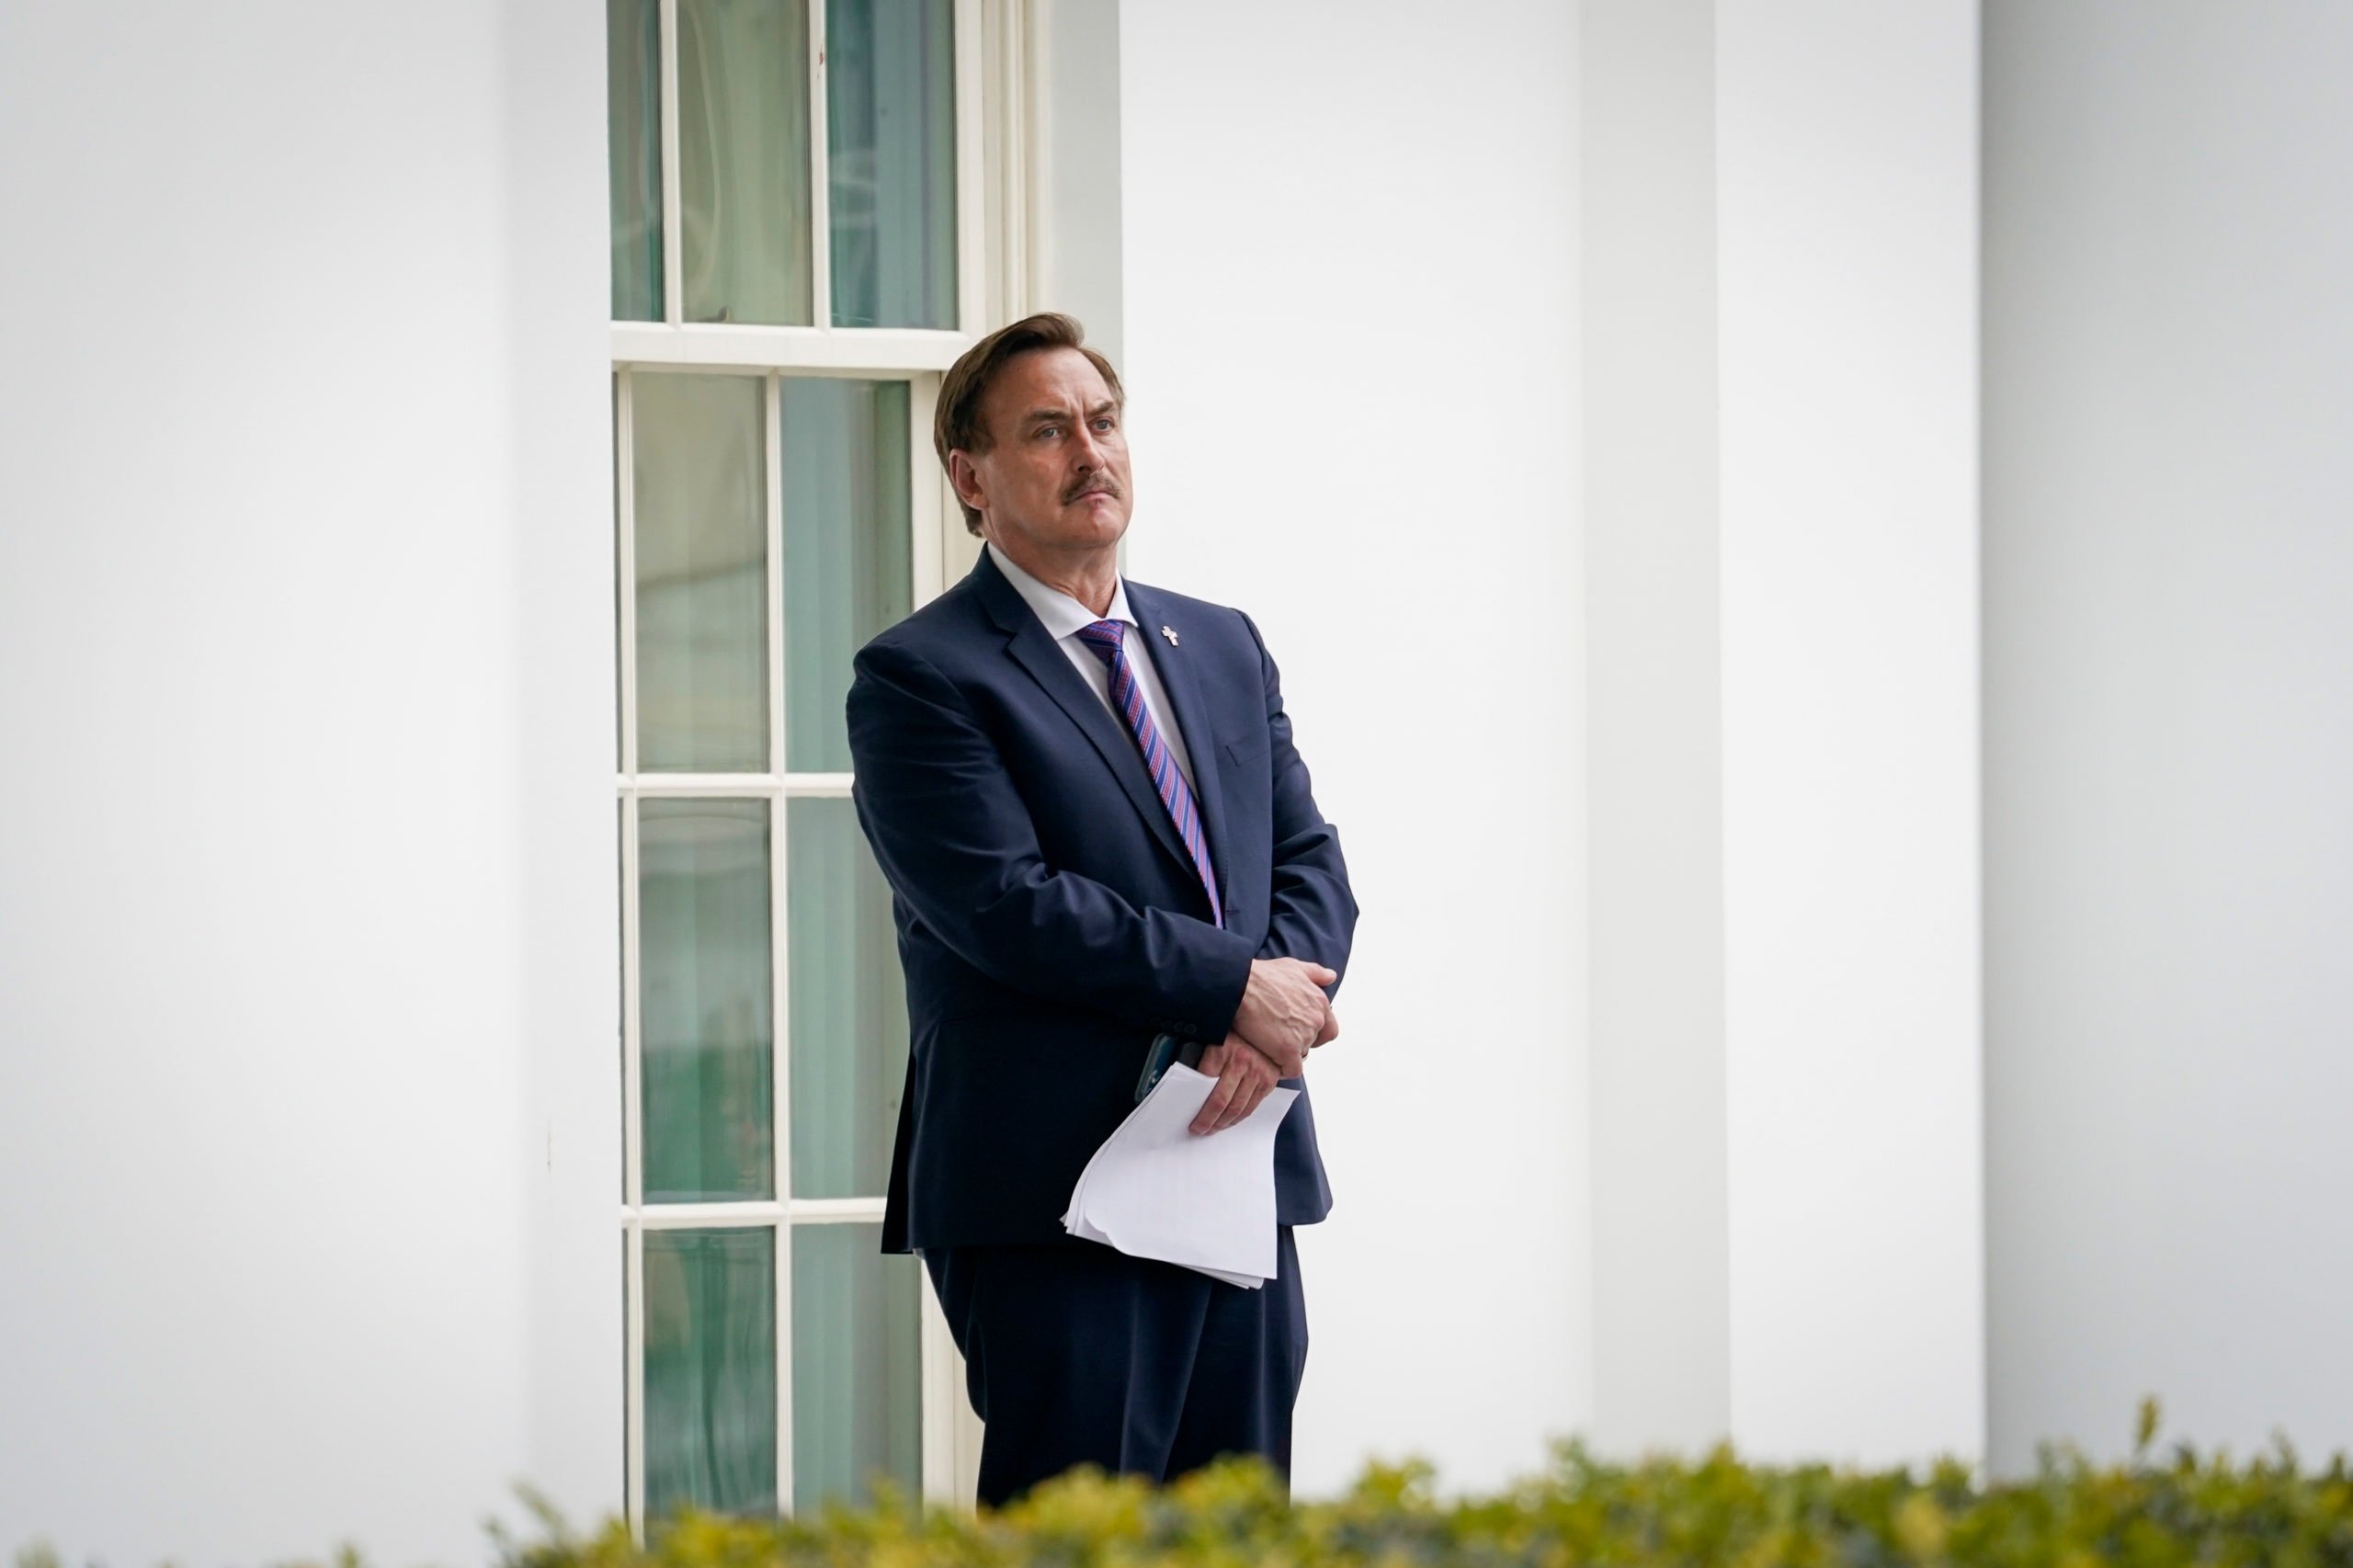 MyPillow CEO Mike Lindell waits outside the White House on Friday. (Drew Angerer/Getty Images)